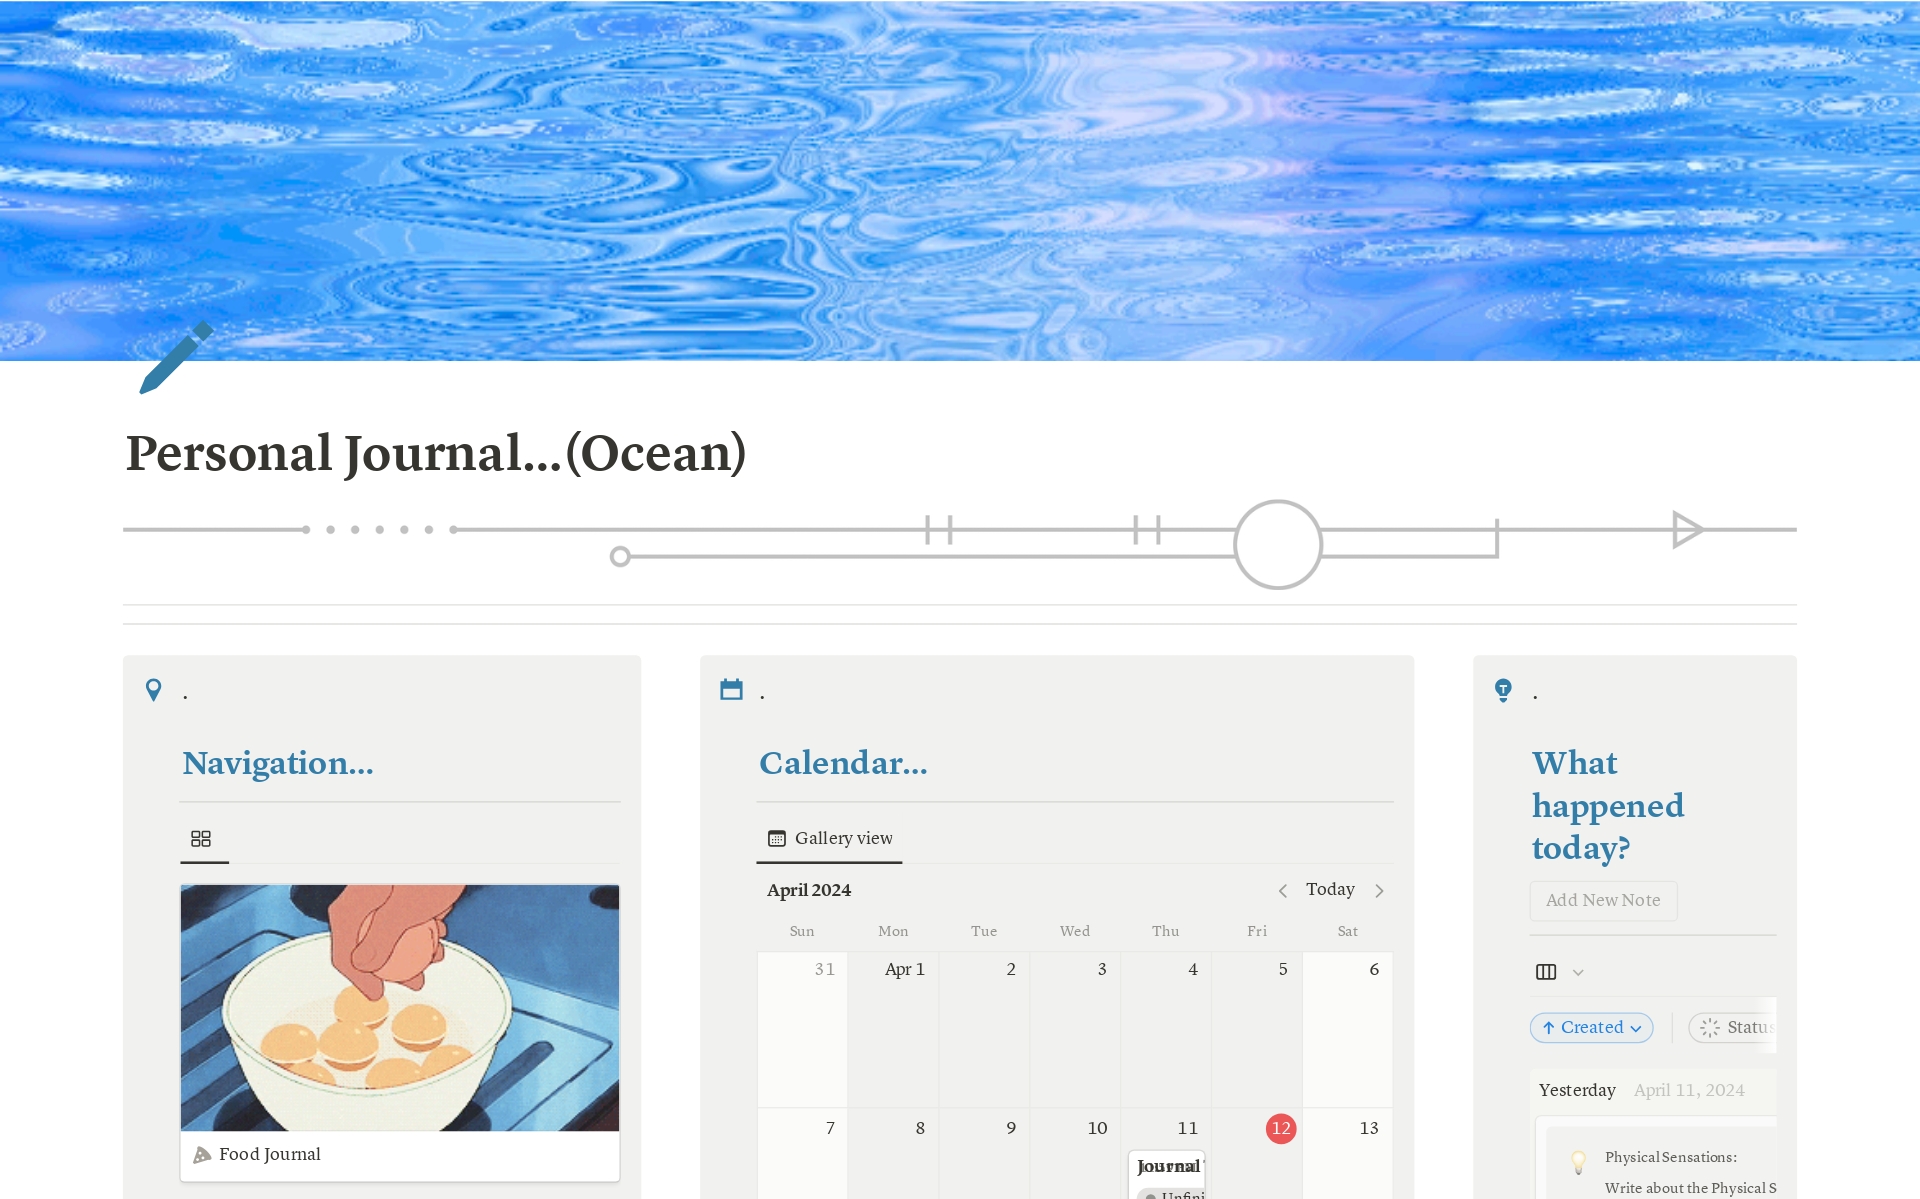 🌊📘 Elevate your journaling with the "Superaesthetic Ocean Blue Journal Template"! Calming blues & dynamic gifs create an immersive space for food, mind, life & travel. Unlock creativity & memories today! 🌊✨